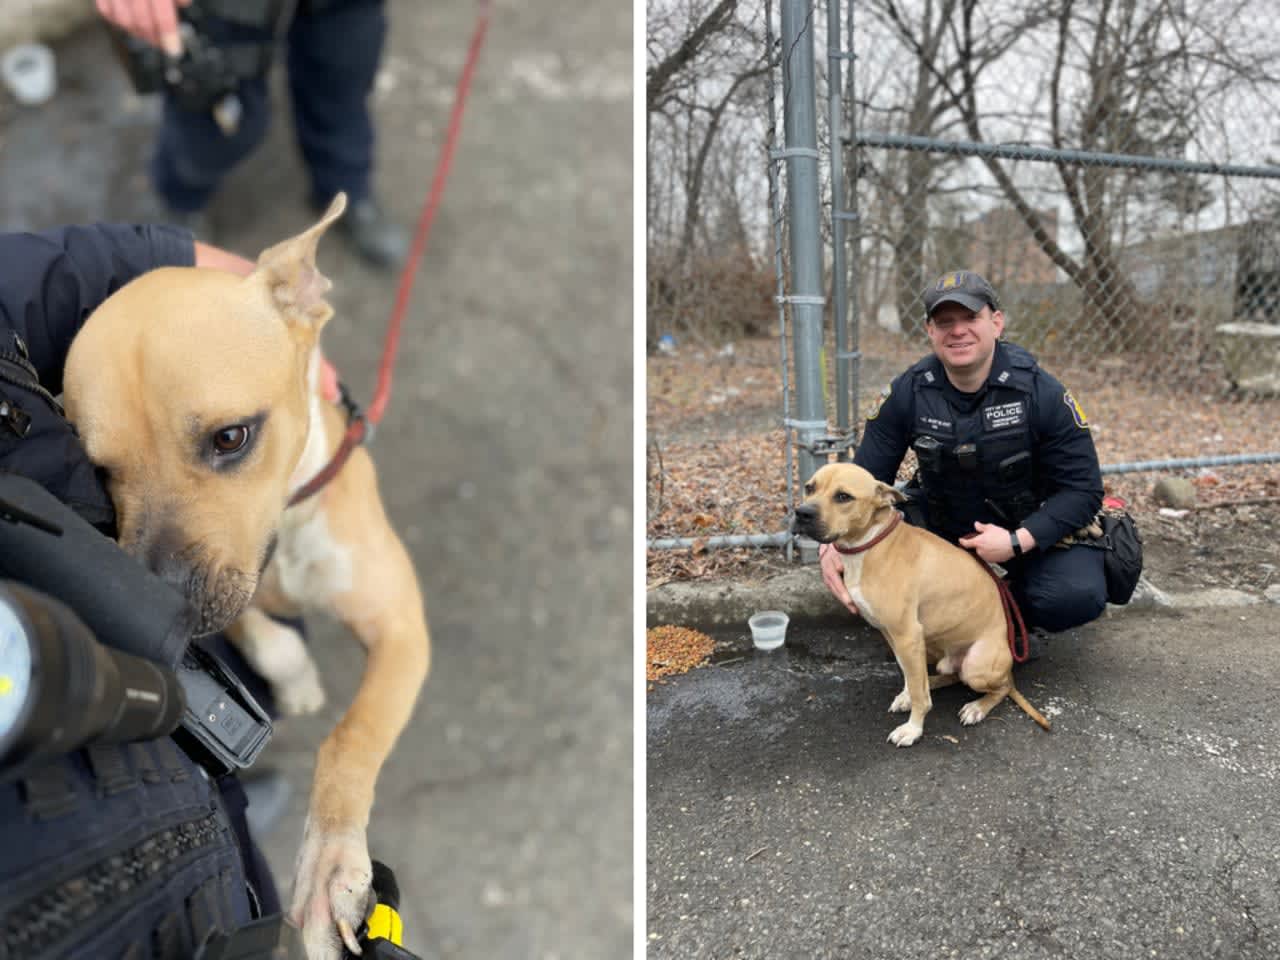 A pit bull puppy was rescued by police in Yonkers after it was found left tied to a tree in a park.